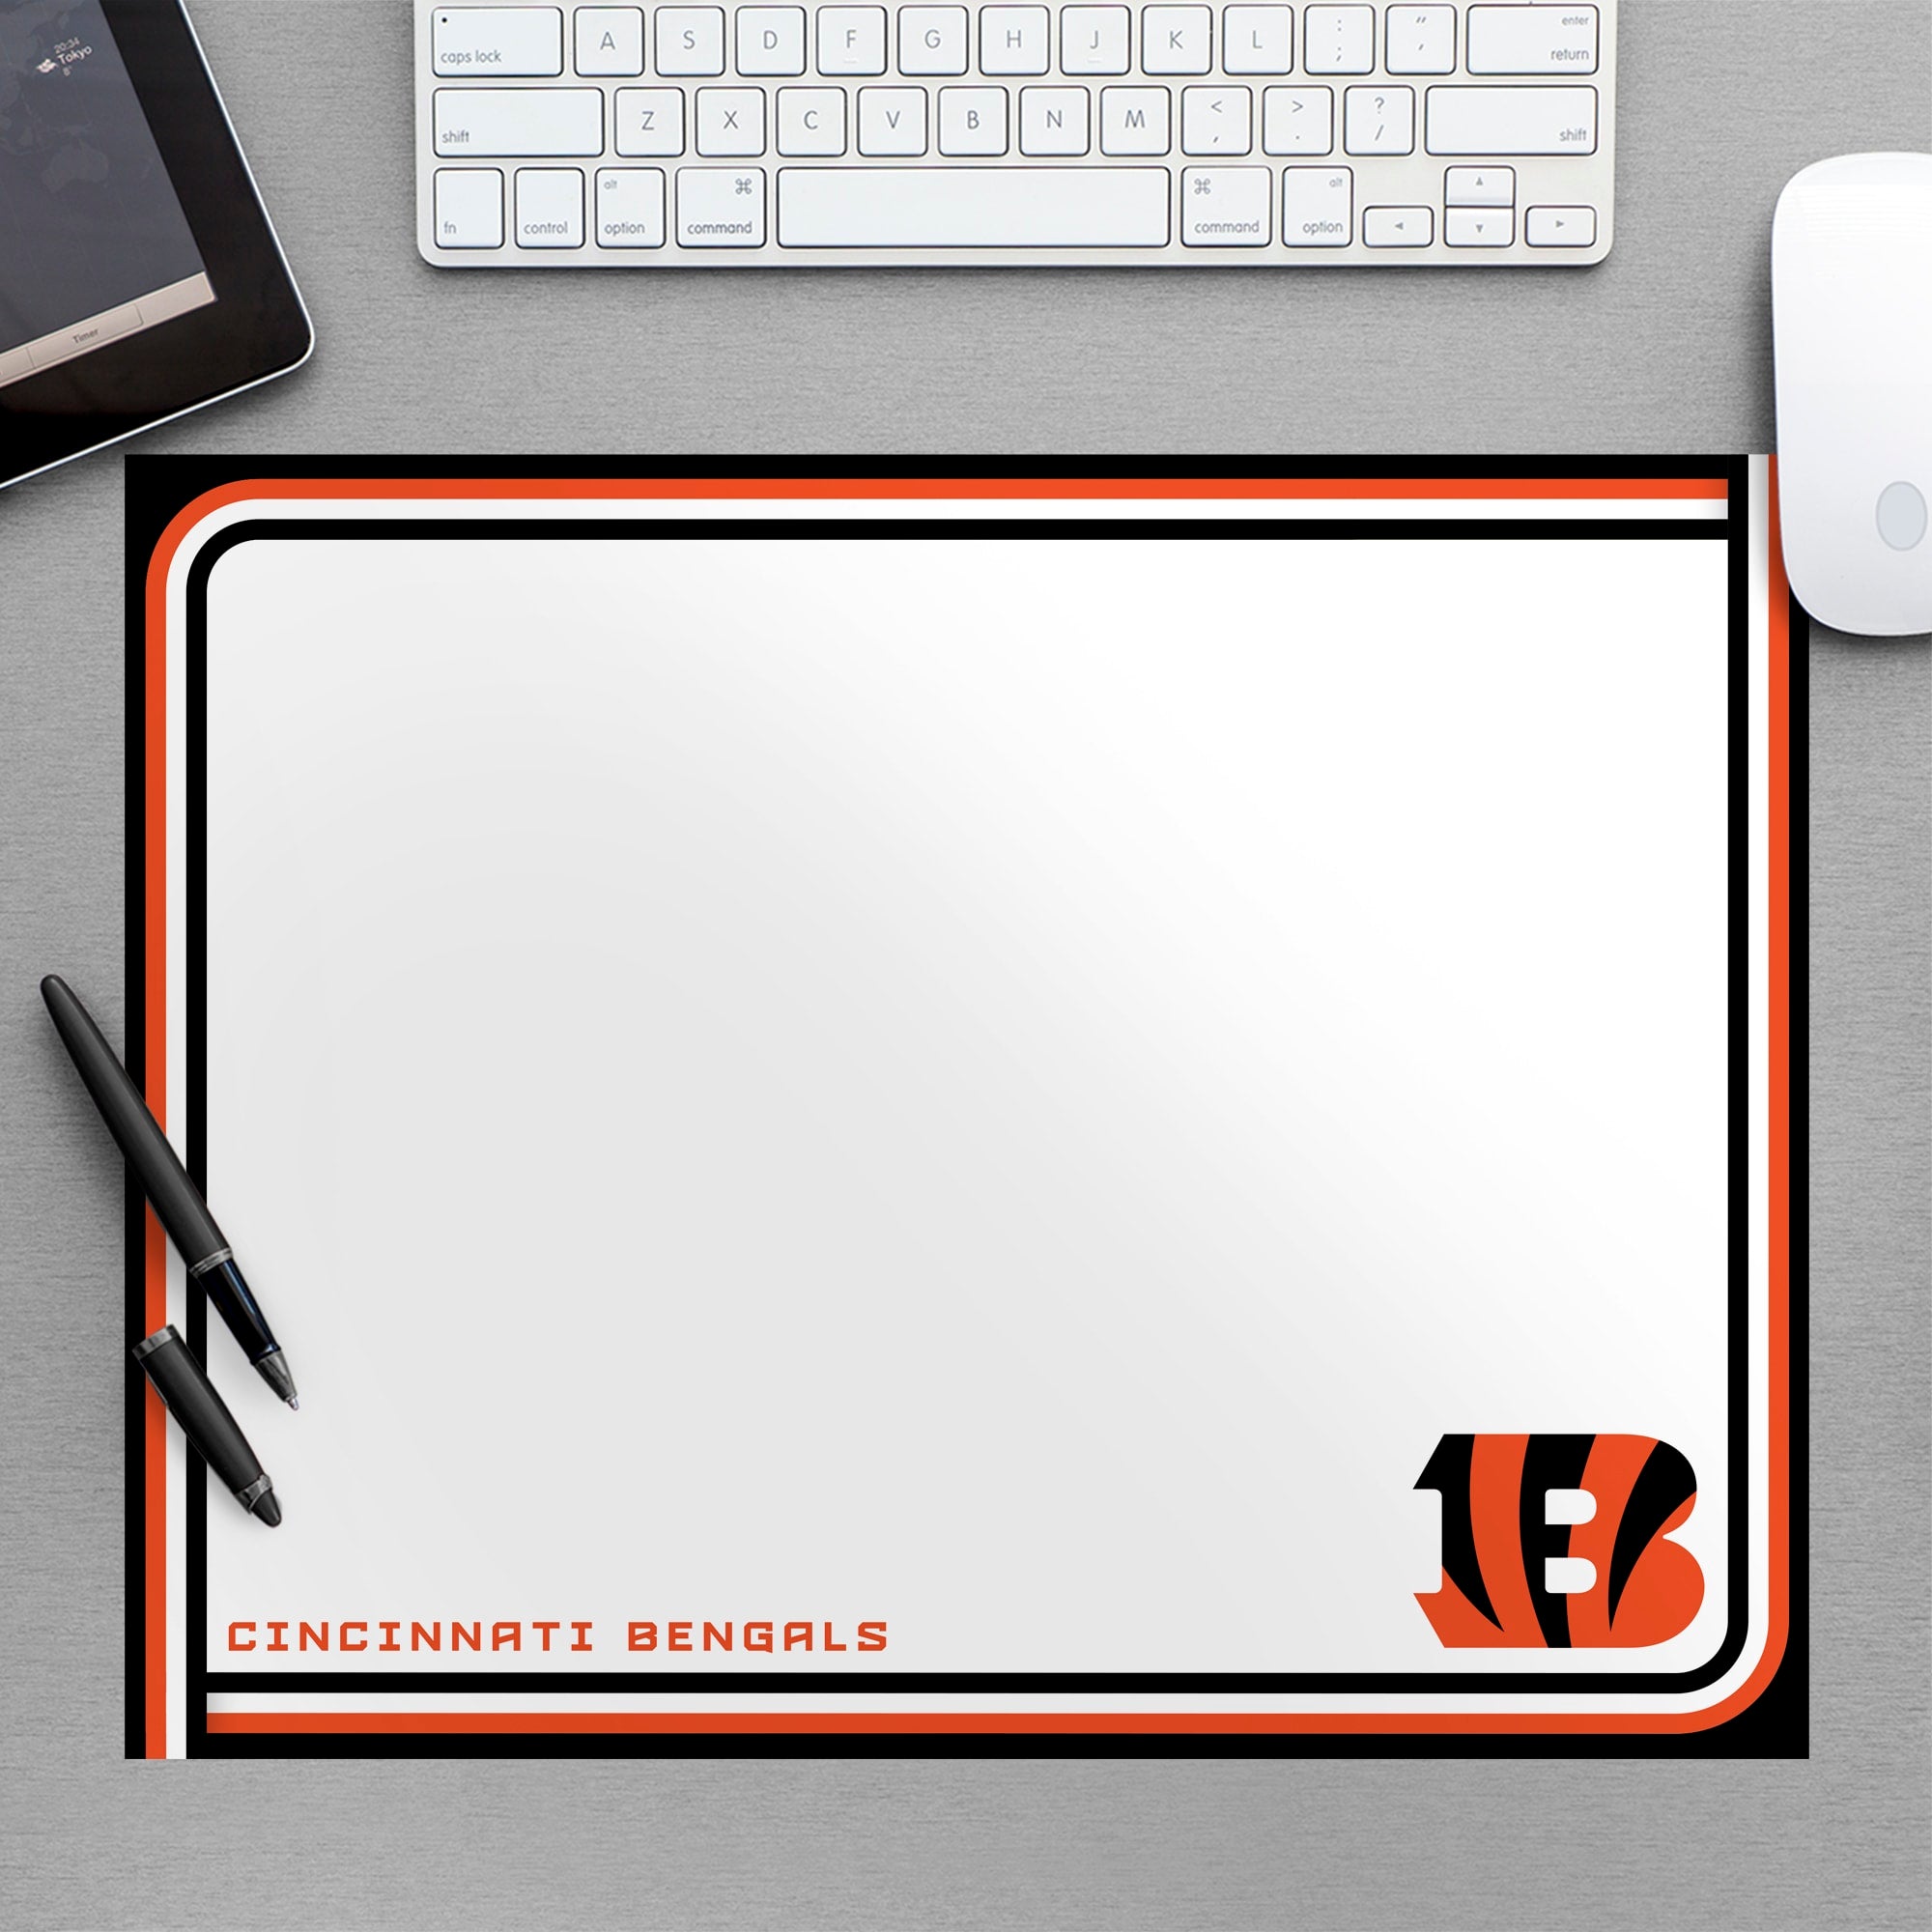 Cincinnati Bengals: Dry Erase Whiteboard - Officially Licensed NFL Removable Wall Decal Large by Fathead | Vinyl